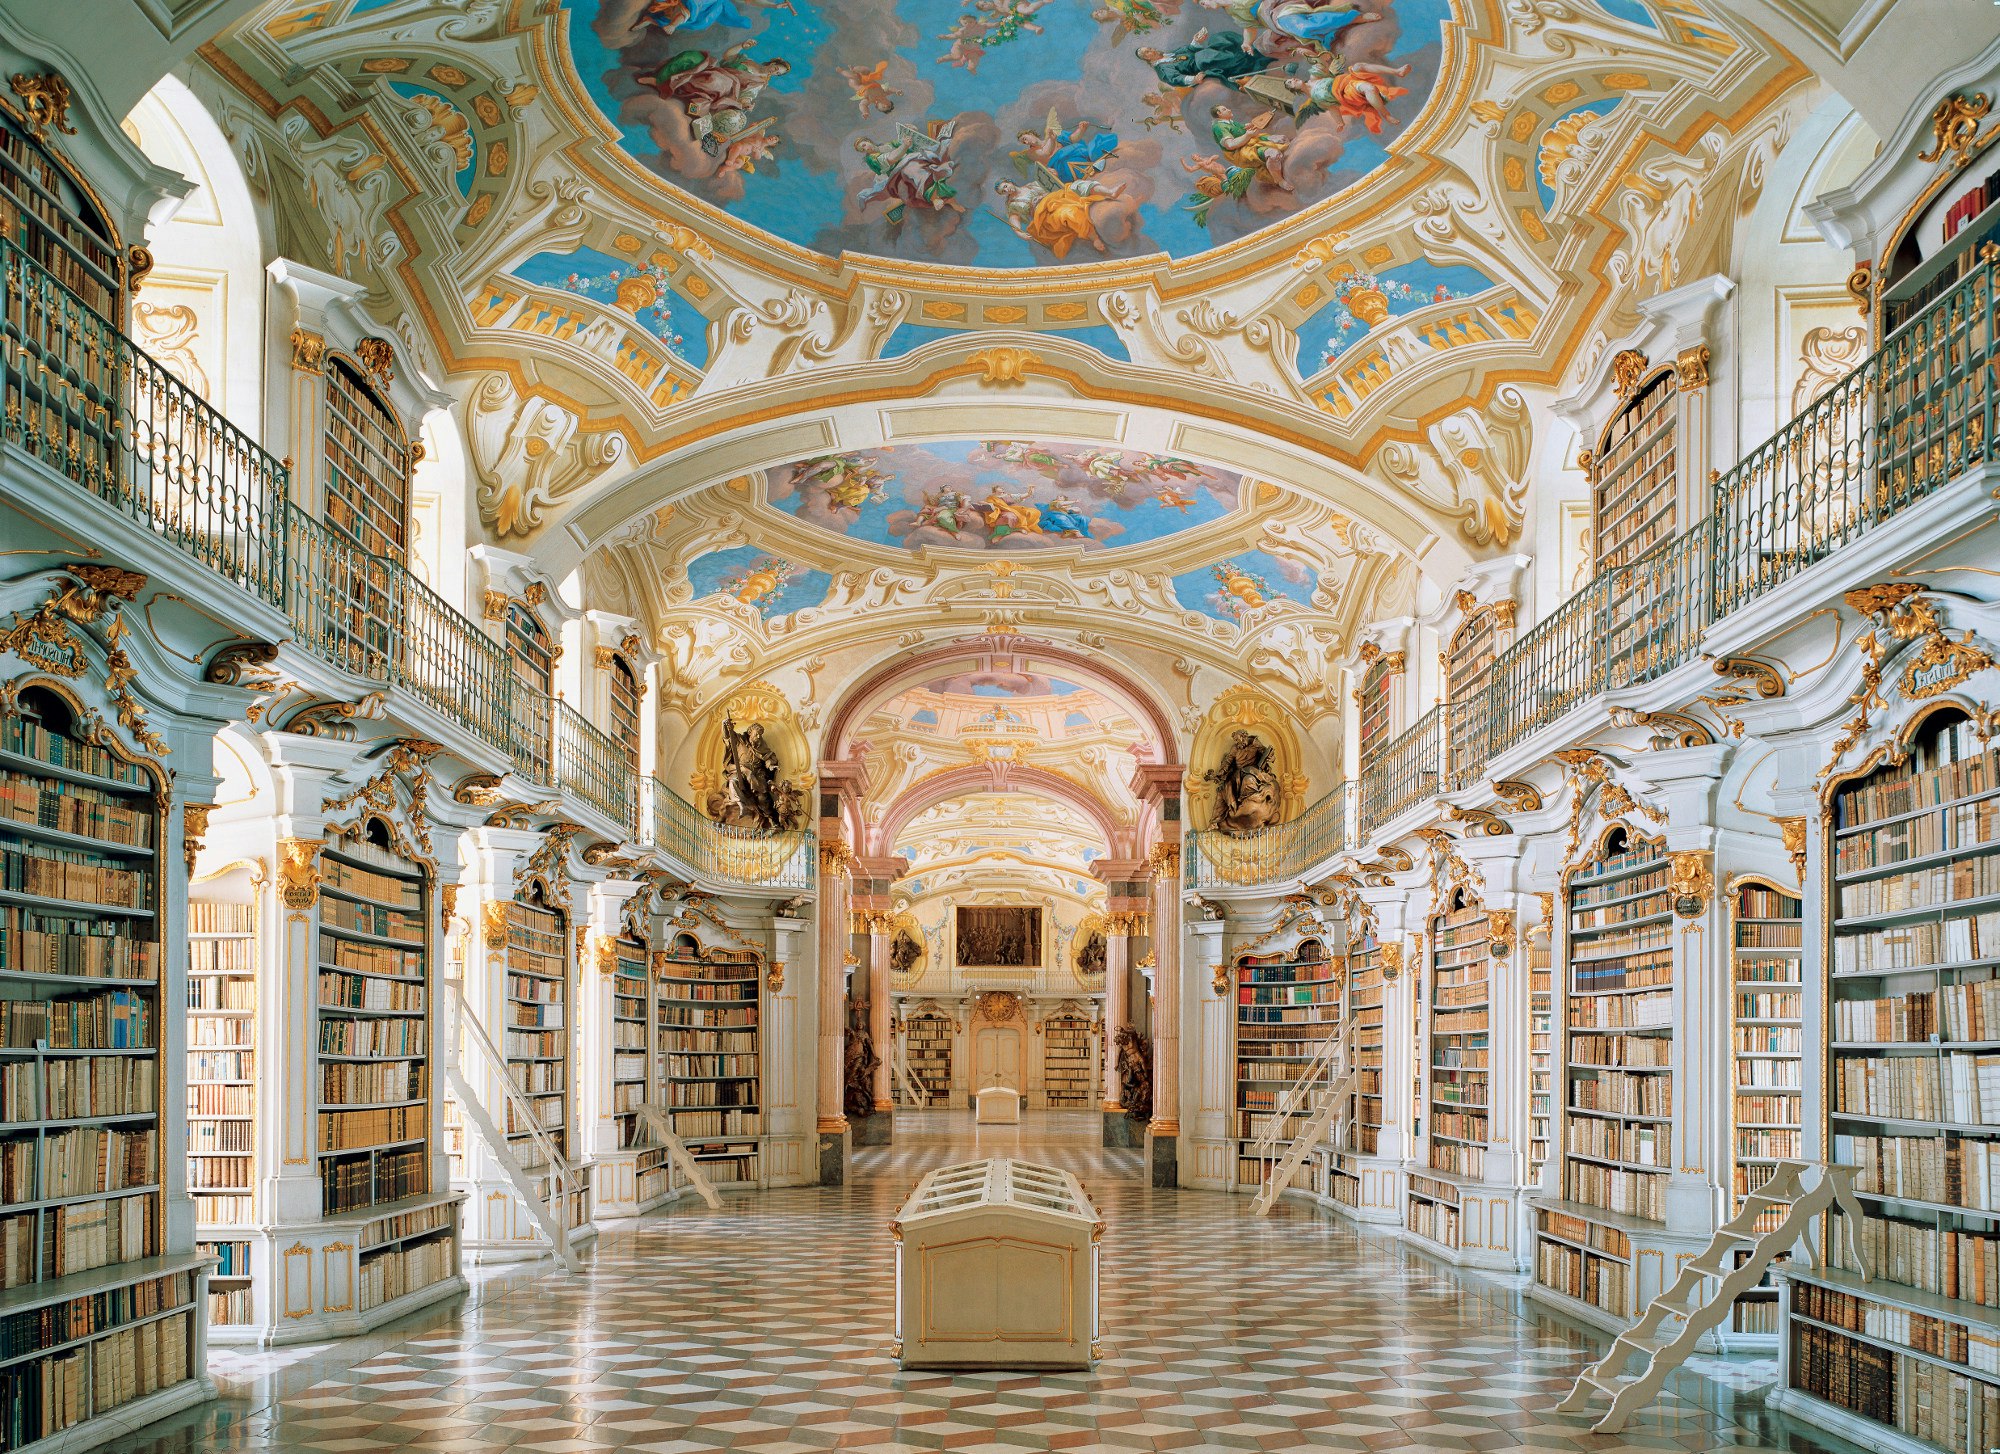 A long hall is supported by rectangular pillars that double as bookcases, each edged with white and gilt baroque columns. A balcony rings the upper level of the columns, and overhead a white, blue and gilt ceiling is made up of vaults and architectural flare.